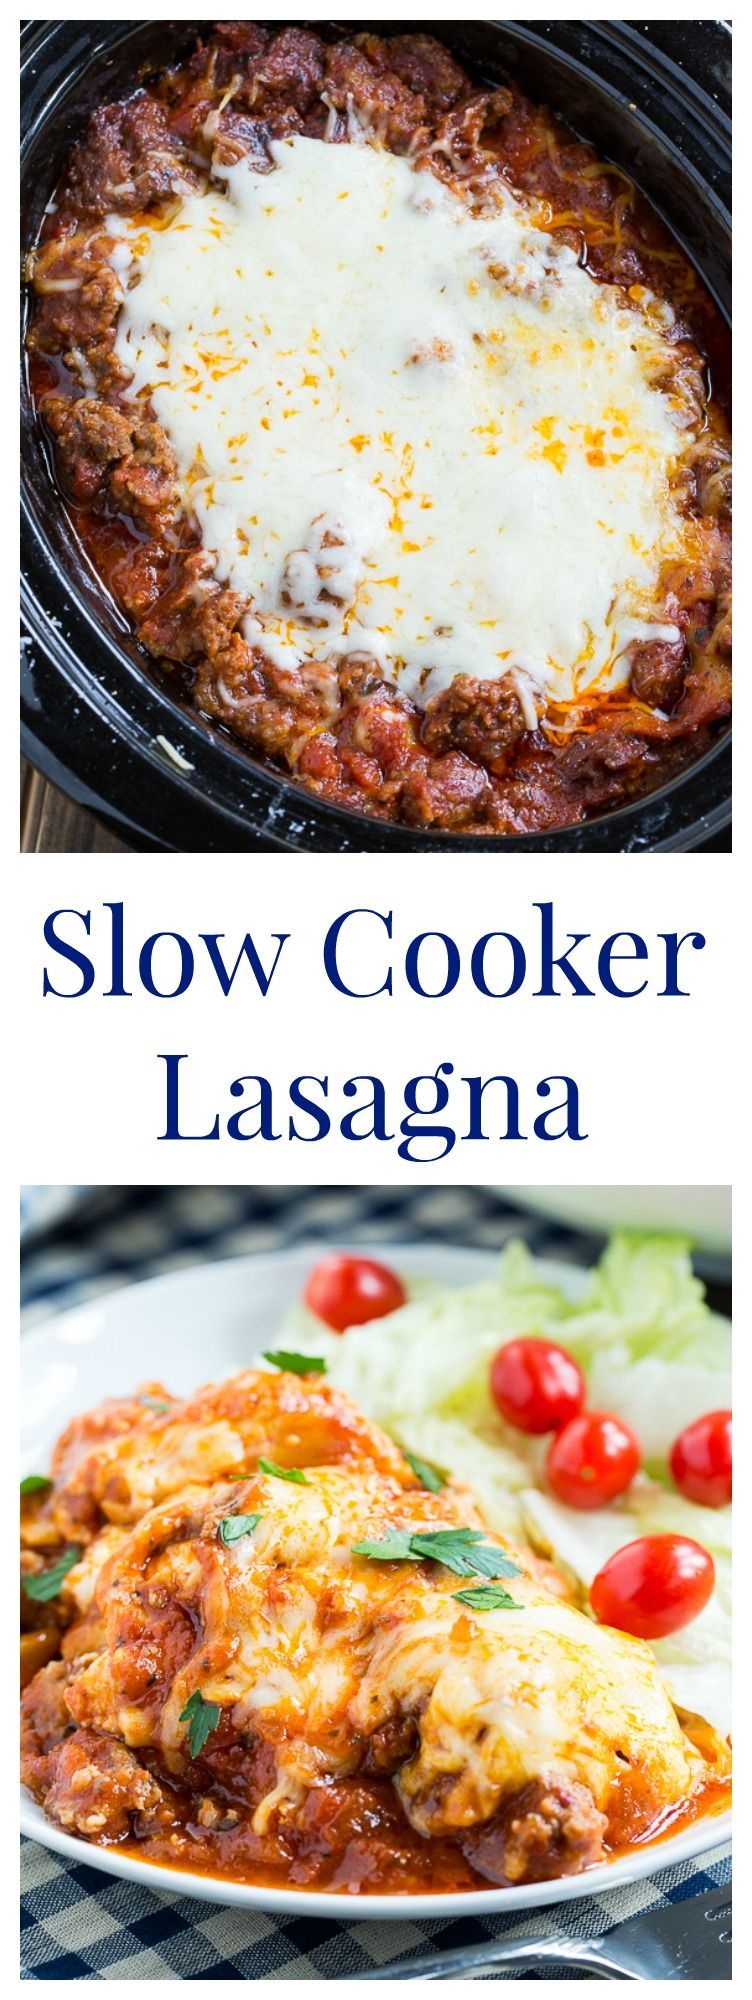 Williams Sonoma Slow Cooker Lasagna – the easiest and best lasagna ever. You wont believe how good crockpot lasagna can taste!